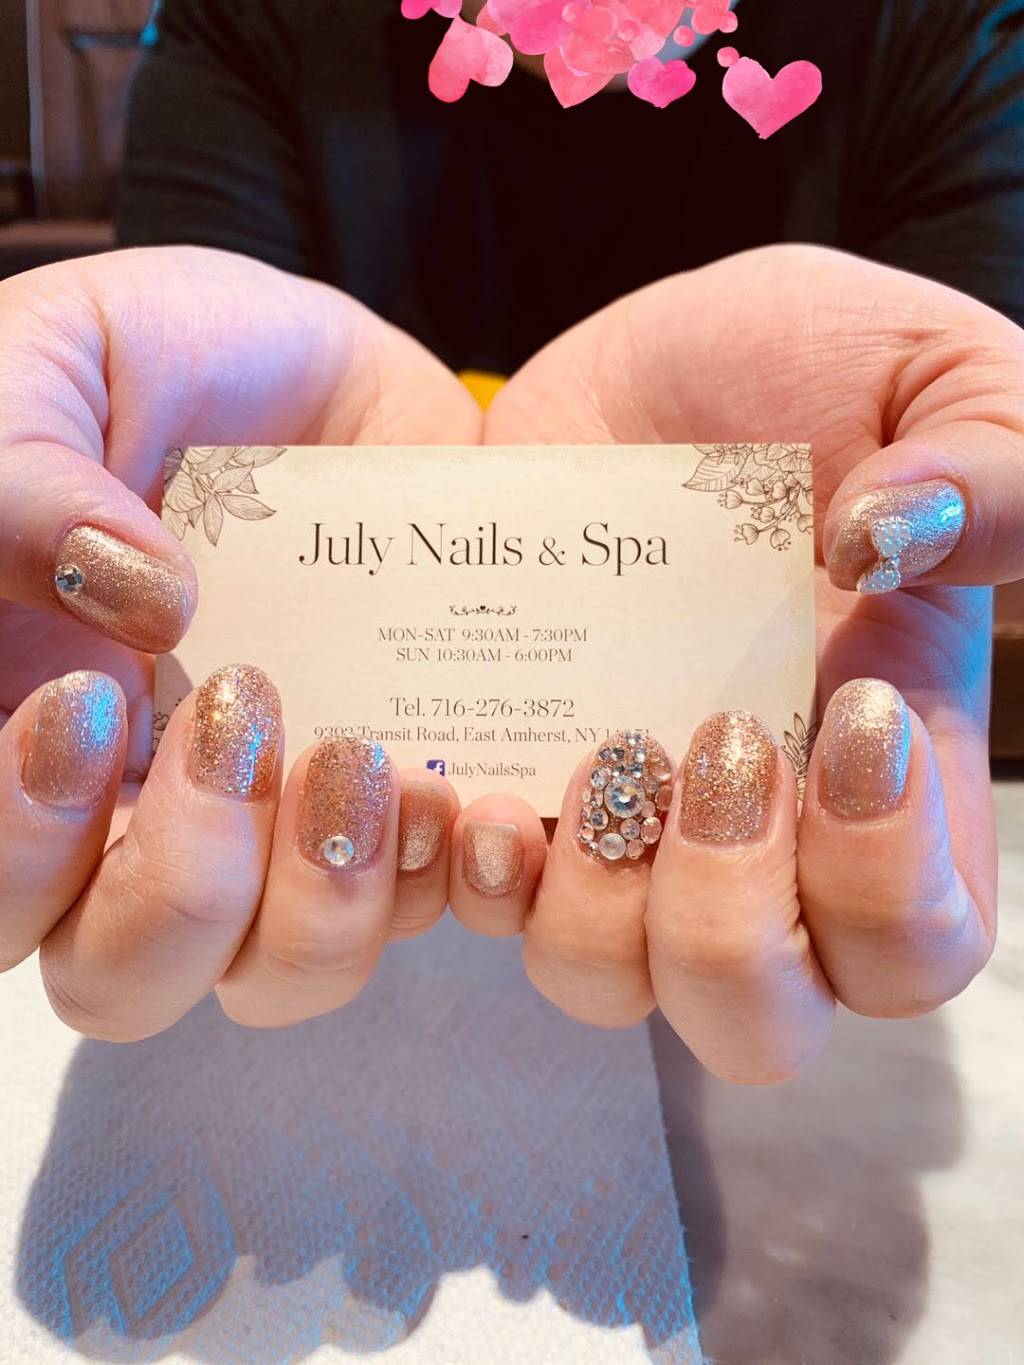 July Nails & Spa | 9392 Transit Rd, East Amherst, NY 14051, USA | Phone: (716) 276-3872